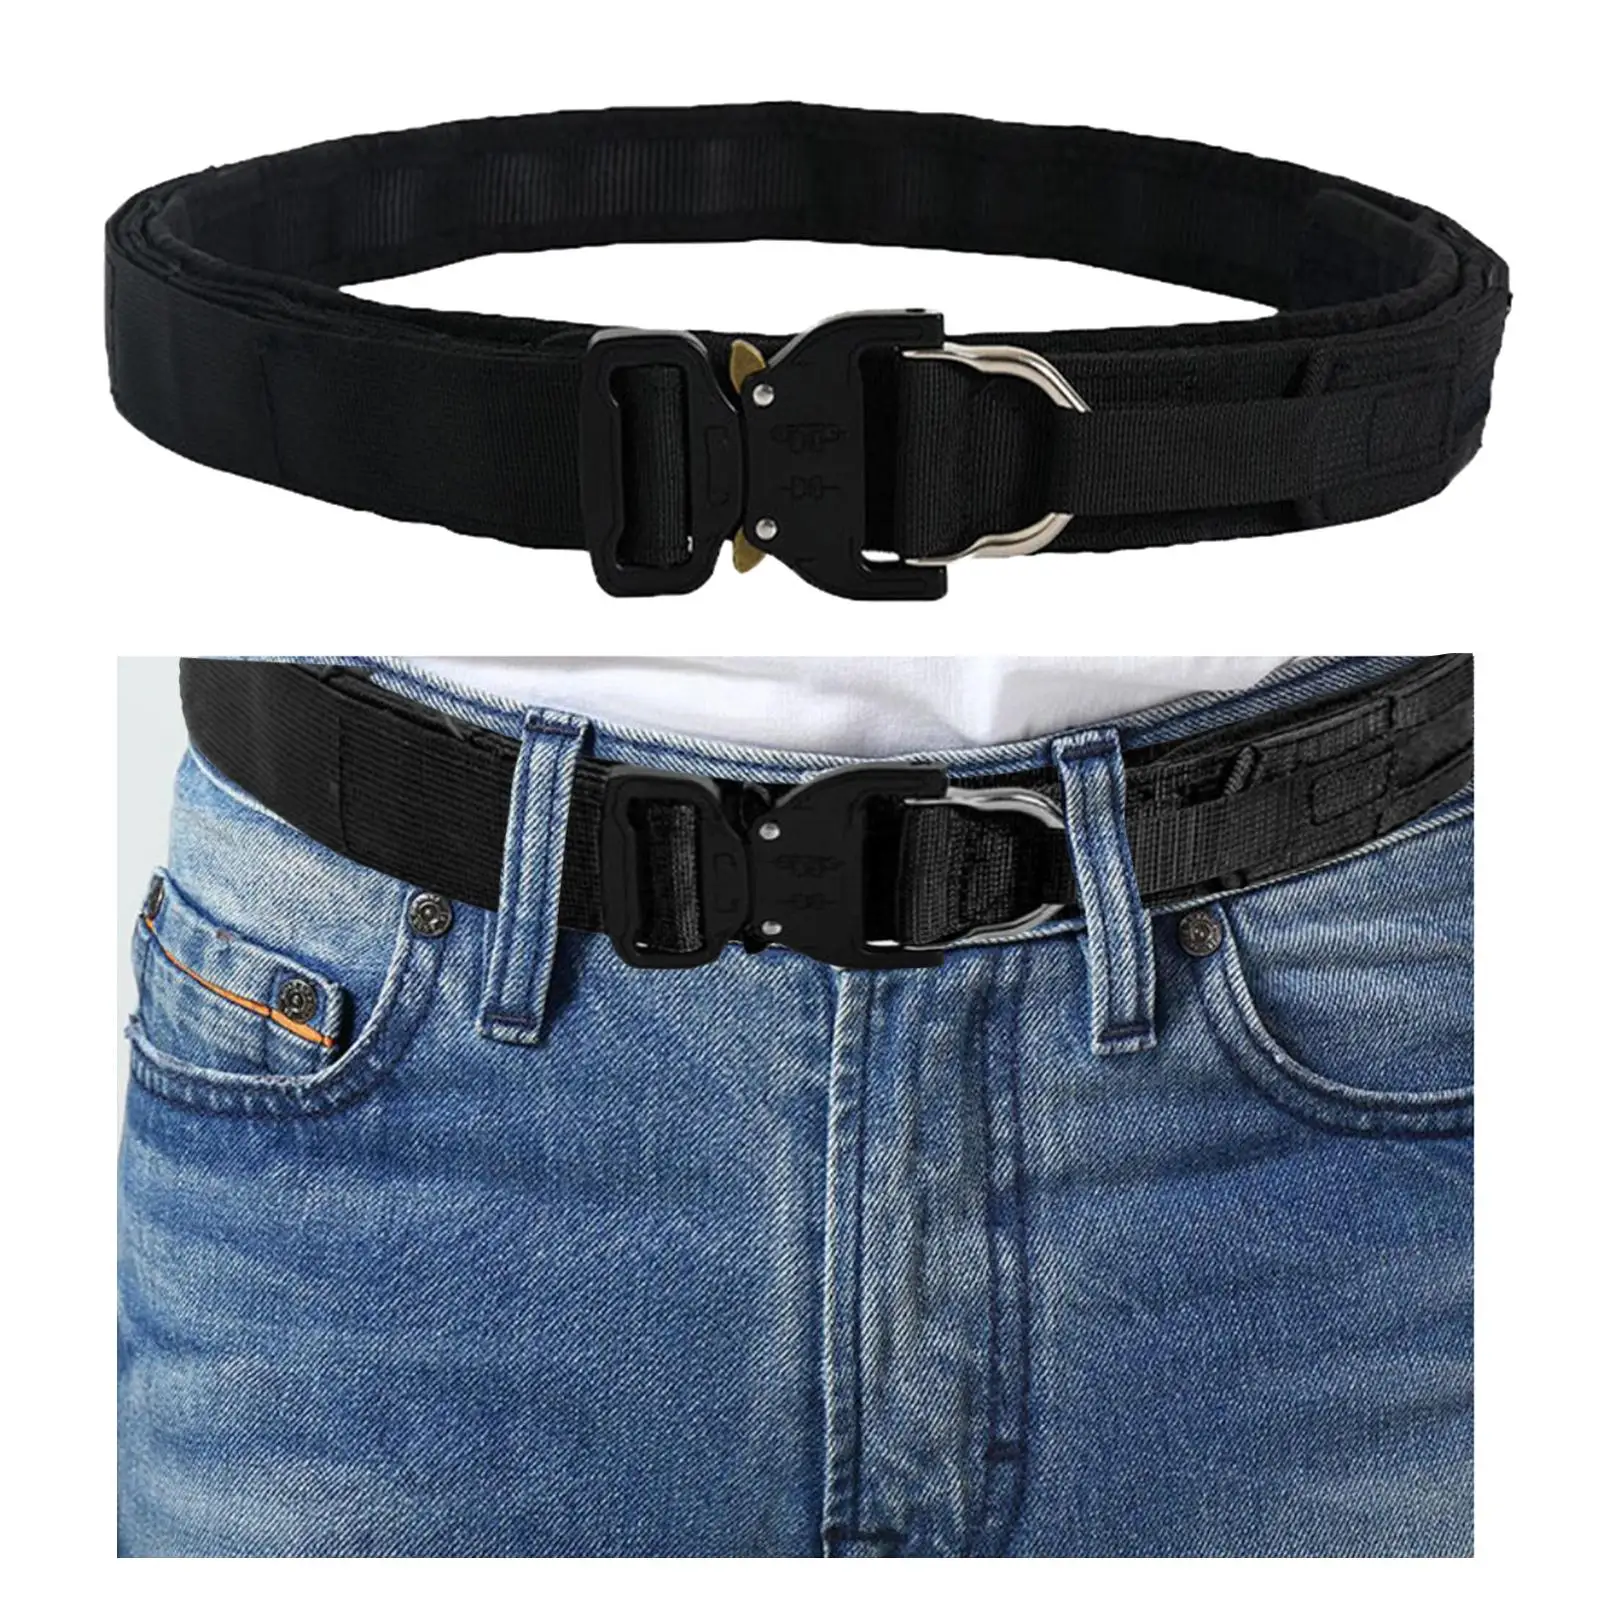 Belt Black Web Nylon Belt with Quick Release Buckle Outdoor Hunting